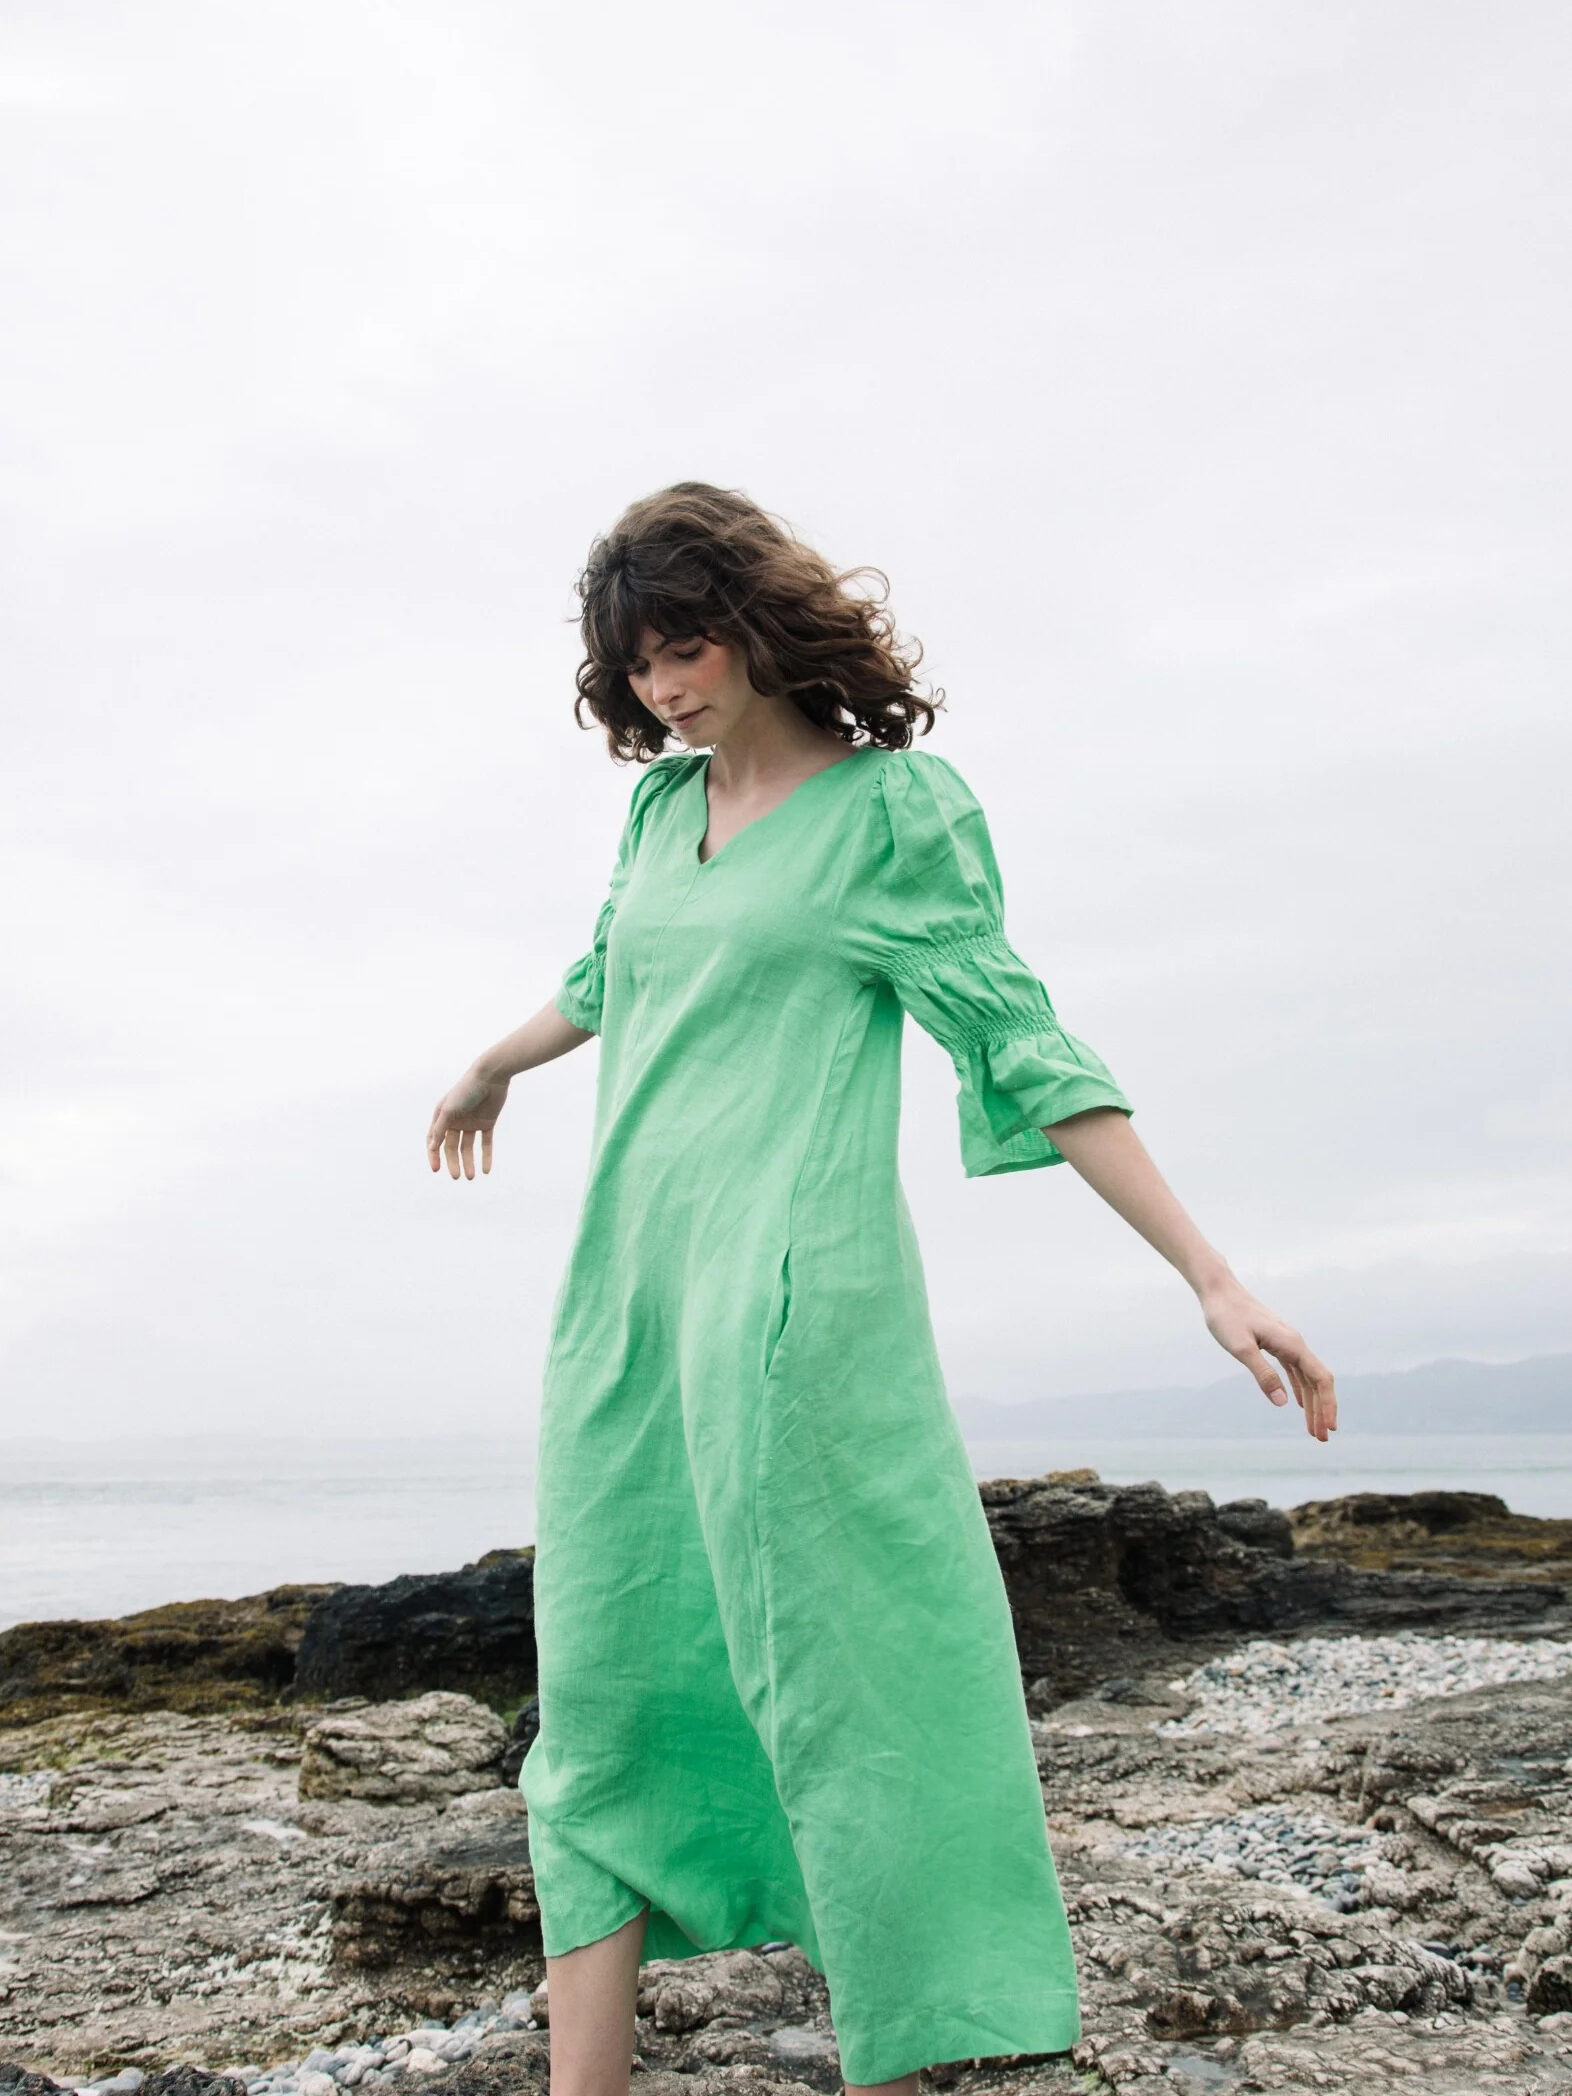 A woman in a green dress standing on a rocky beach.